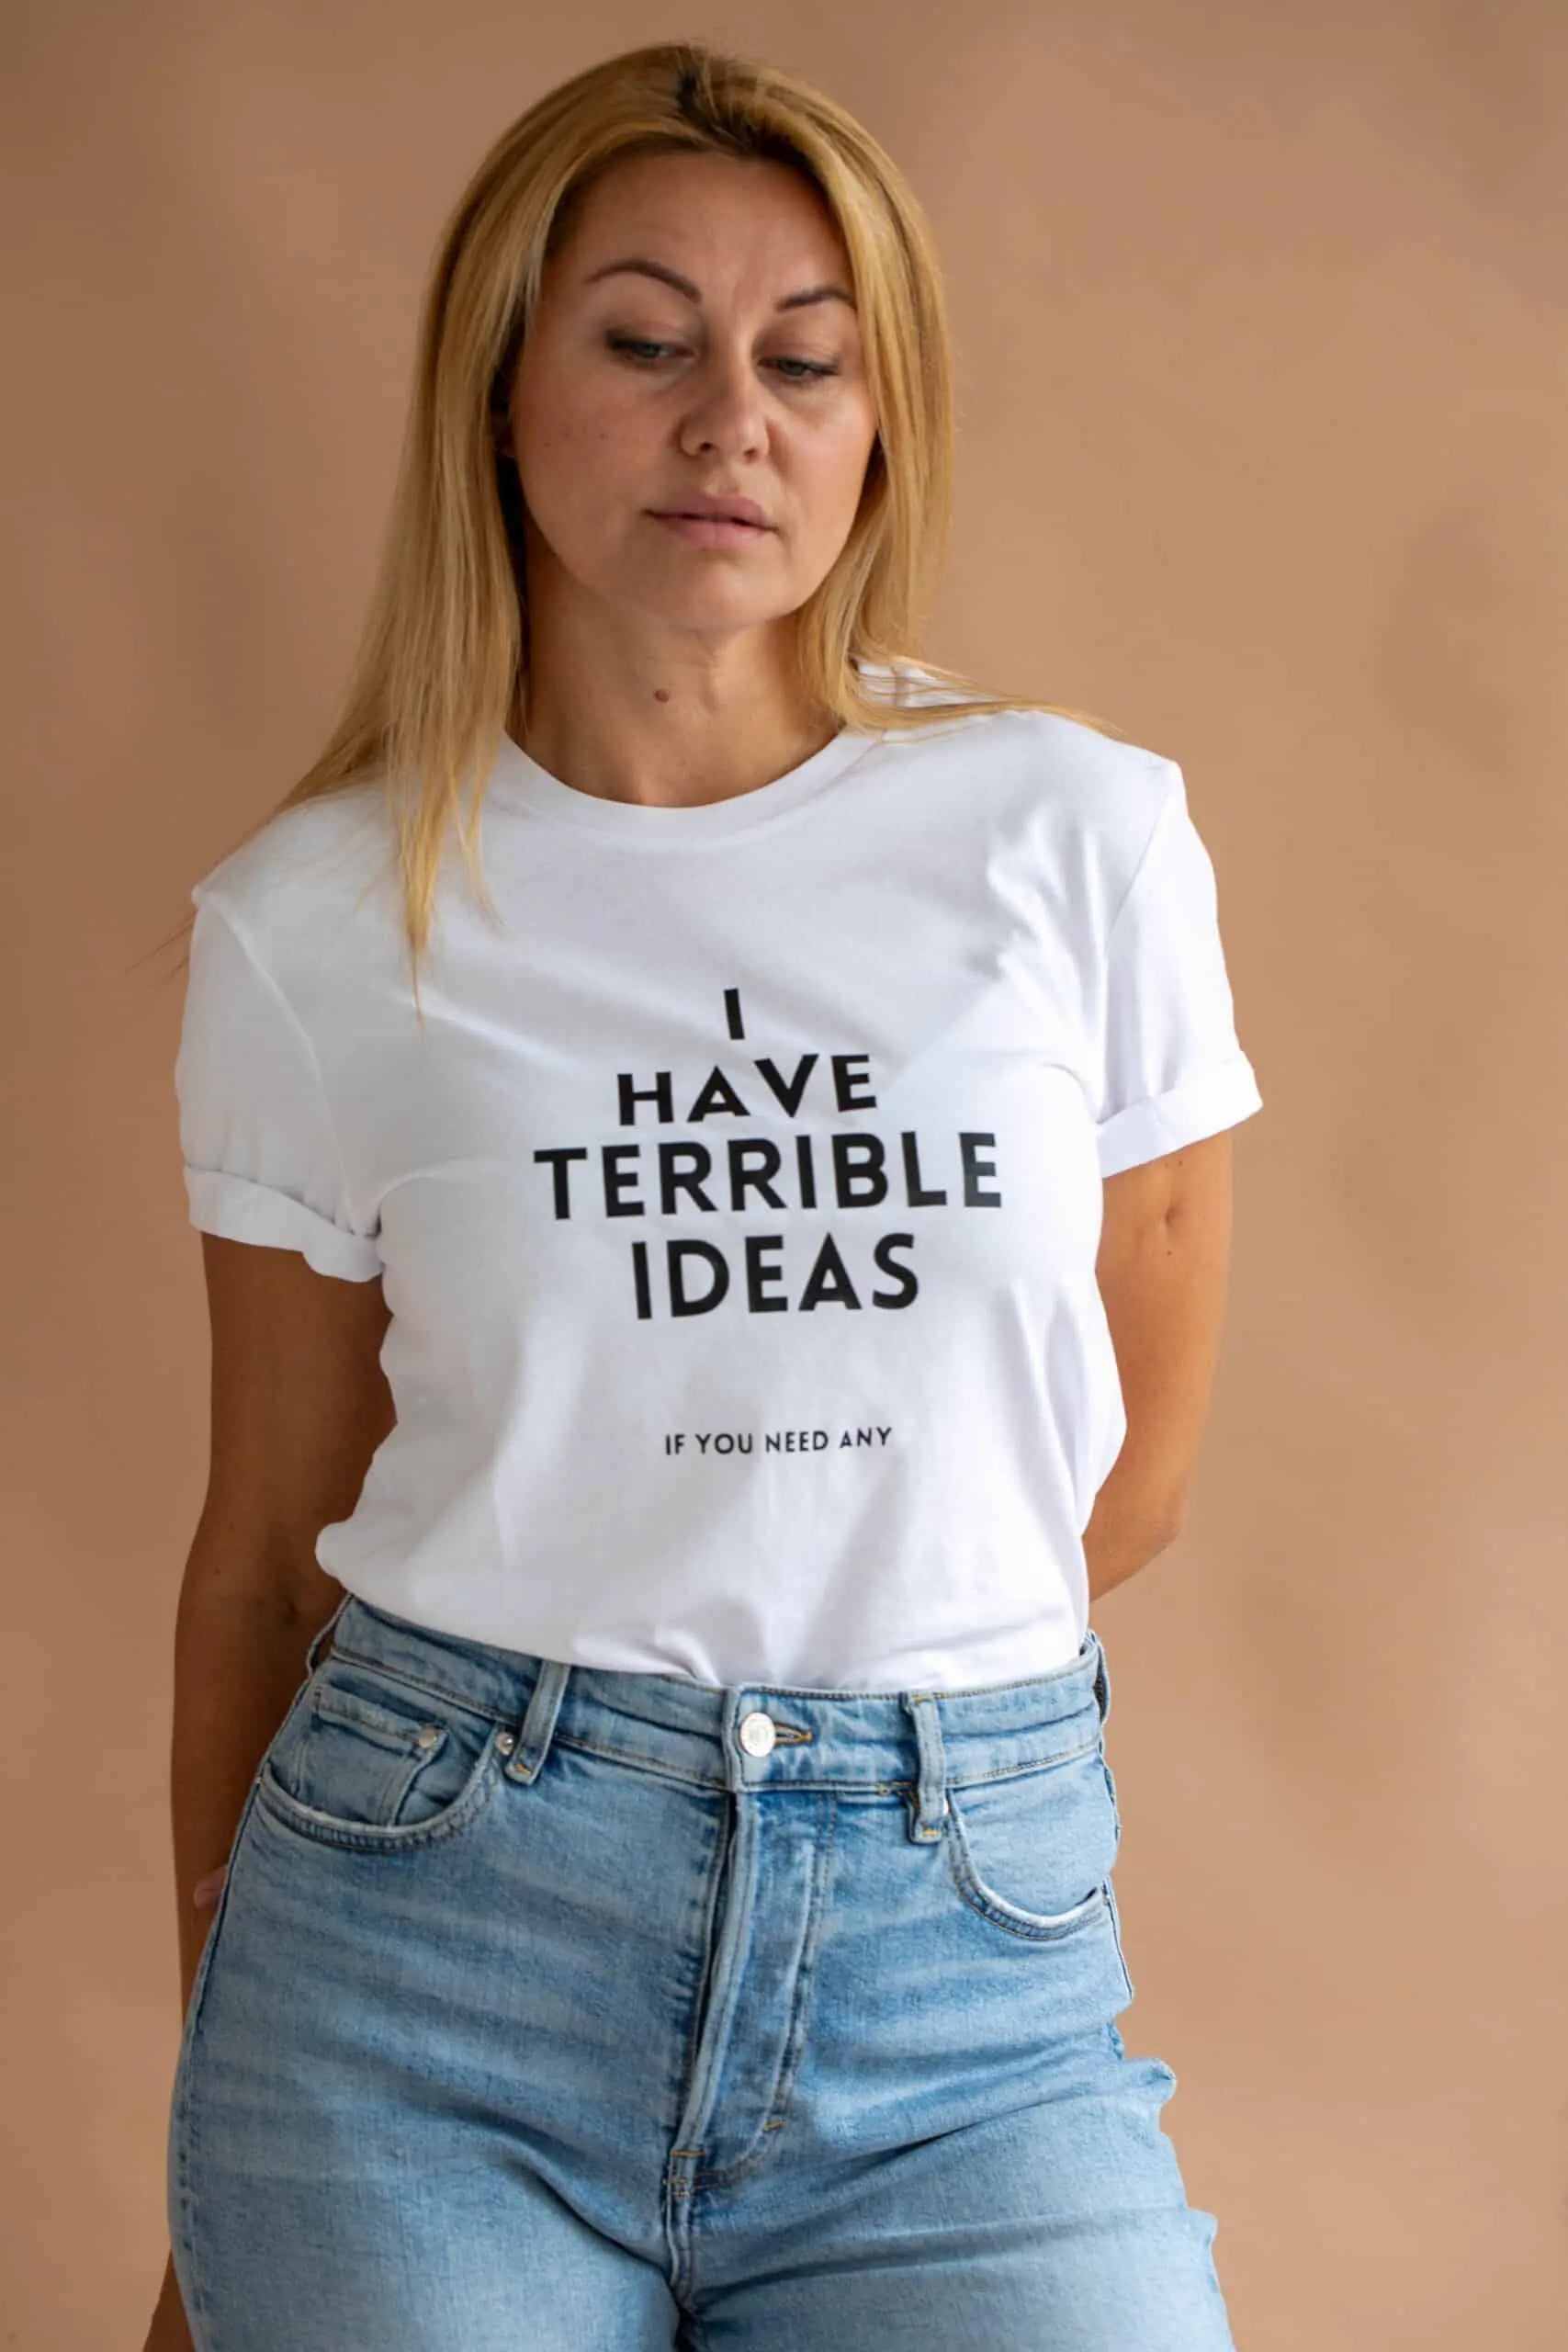 A woman in an oversized white t-shirt with black text I Have Terrible Ideas, paired with blue jeans, posing for a photo. Casual and humorous organic cotton tee.